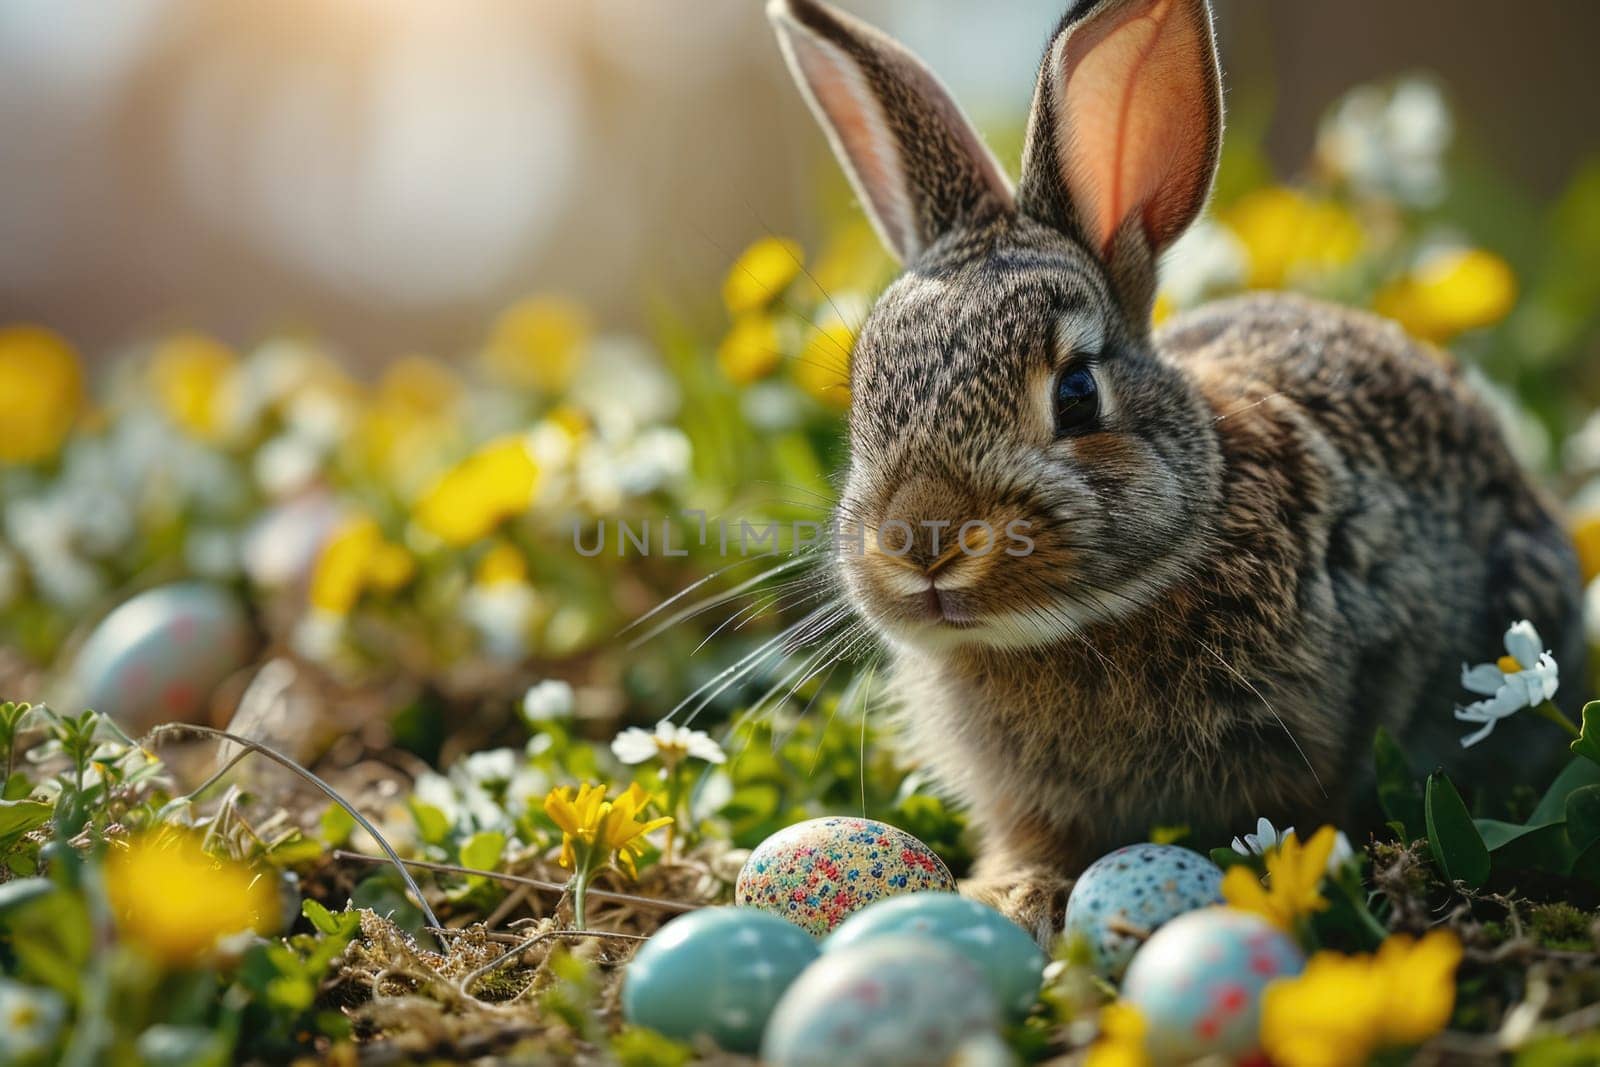 A cute rabbit on the background of a green forest, surrounded by Easter eggs and colorful flowers, creates an atmosphere of spring celebration and joy.